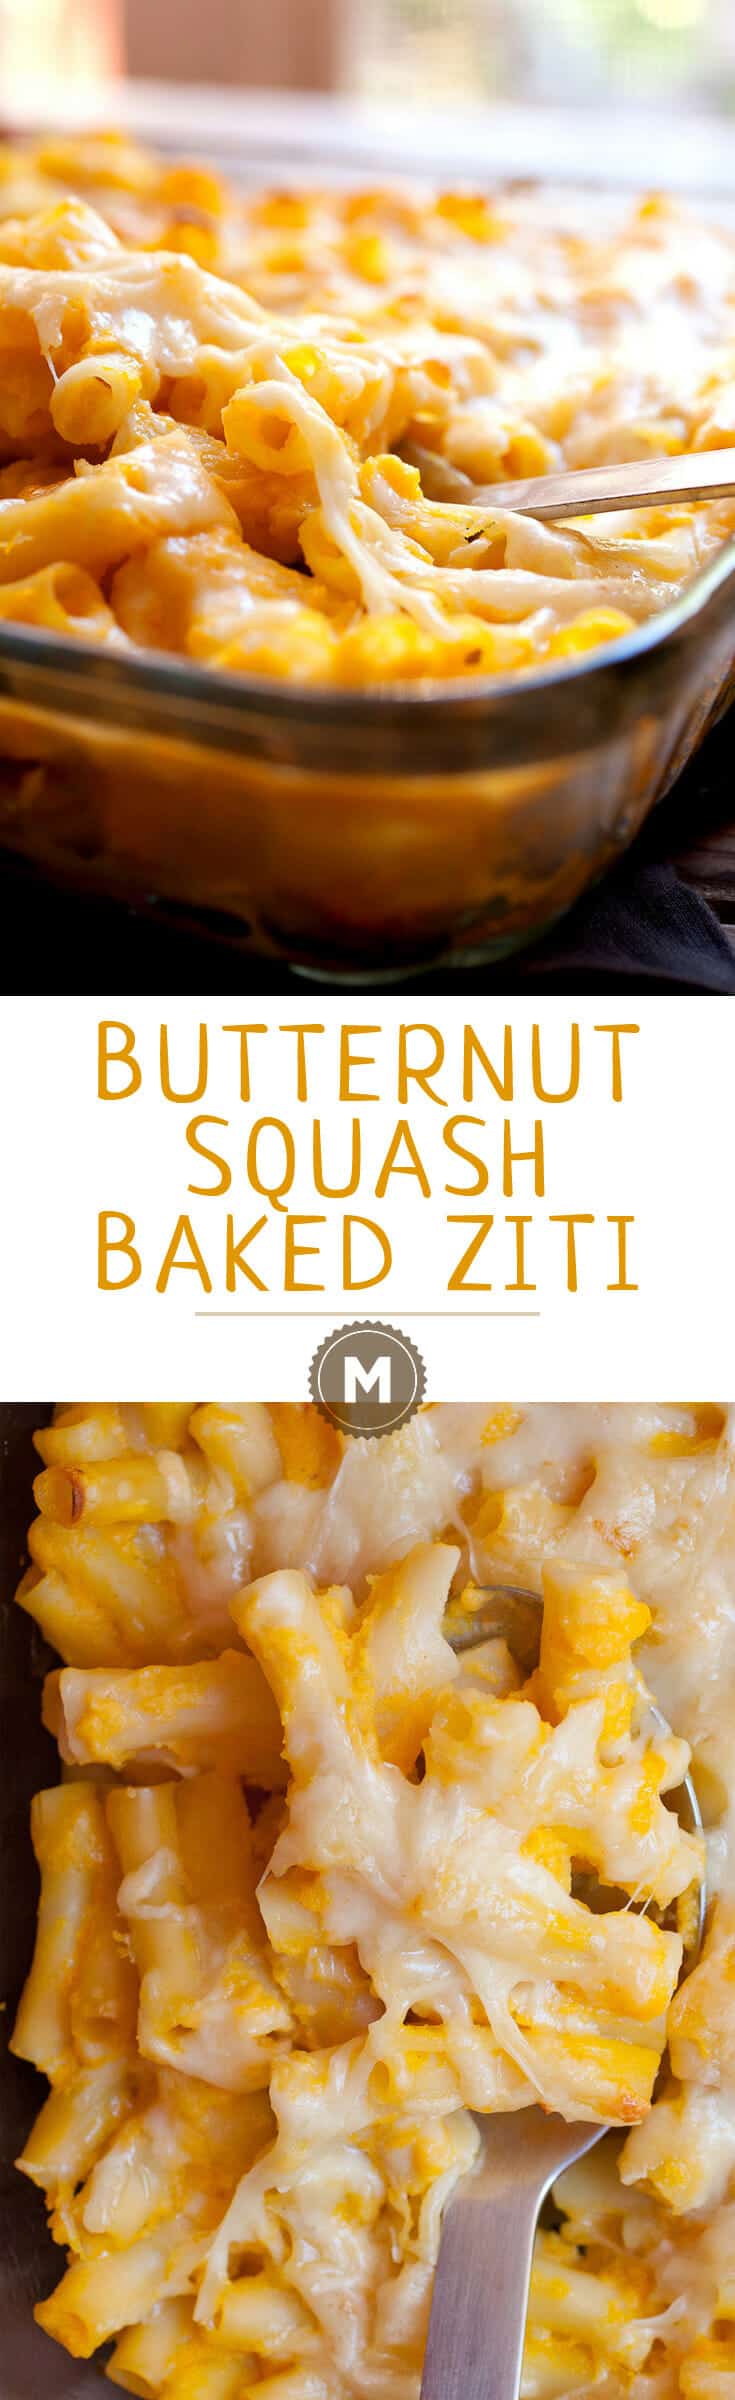 Butternut Squash Baked Ziti: This is such a great fall twist on classic baked ziti. Butternut Squash, Gruyere cheese, and a few spices to tie it all together. Easy to make and will feed a crowd! Baked ziti is the BEST! | macheesmo.com